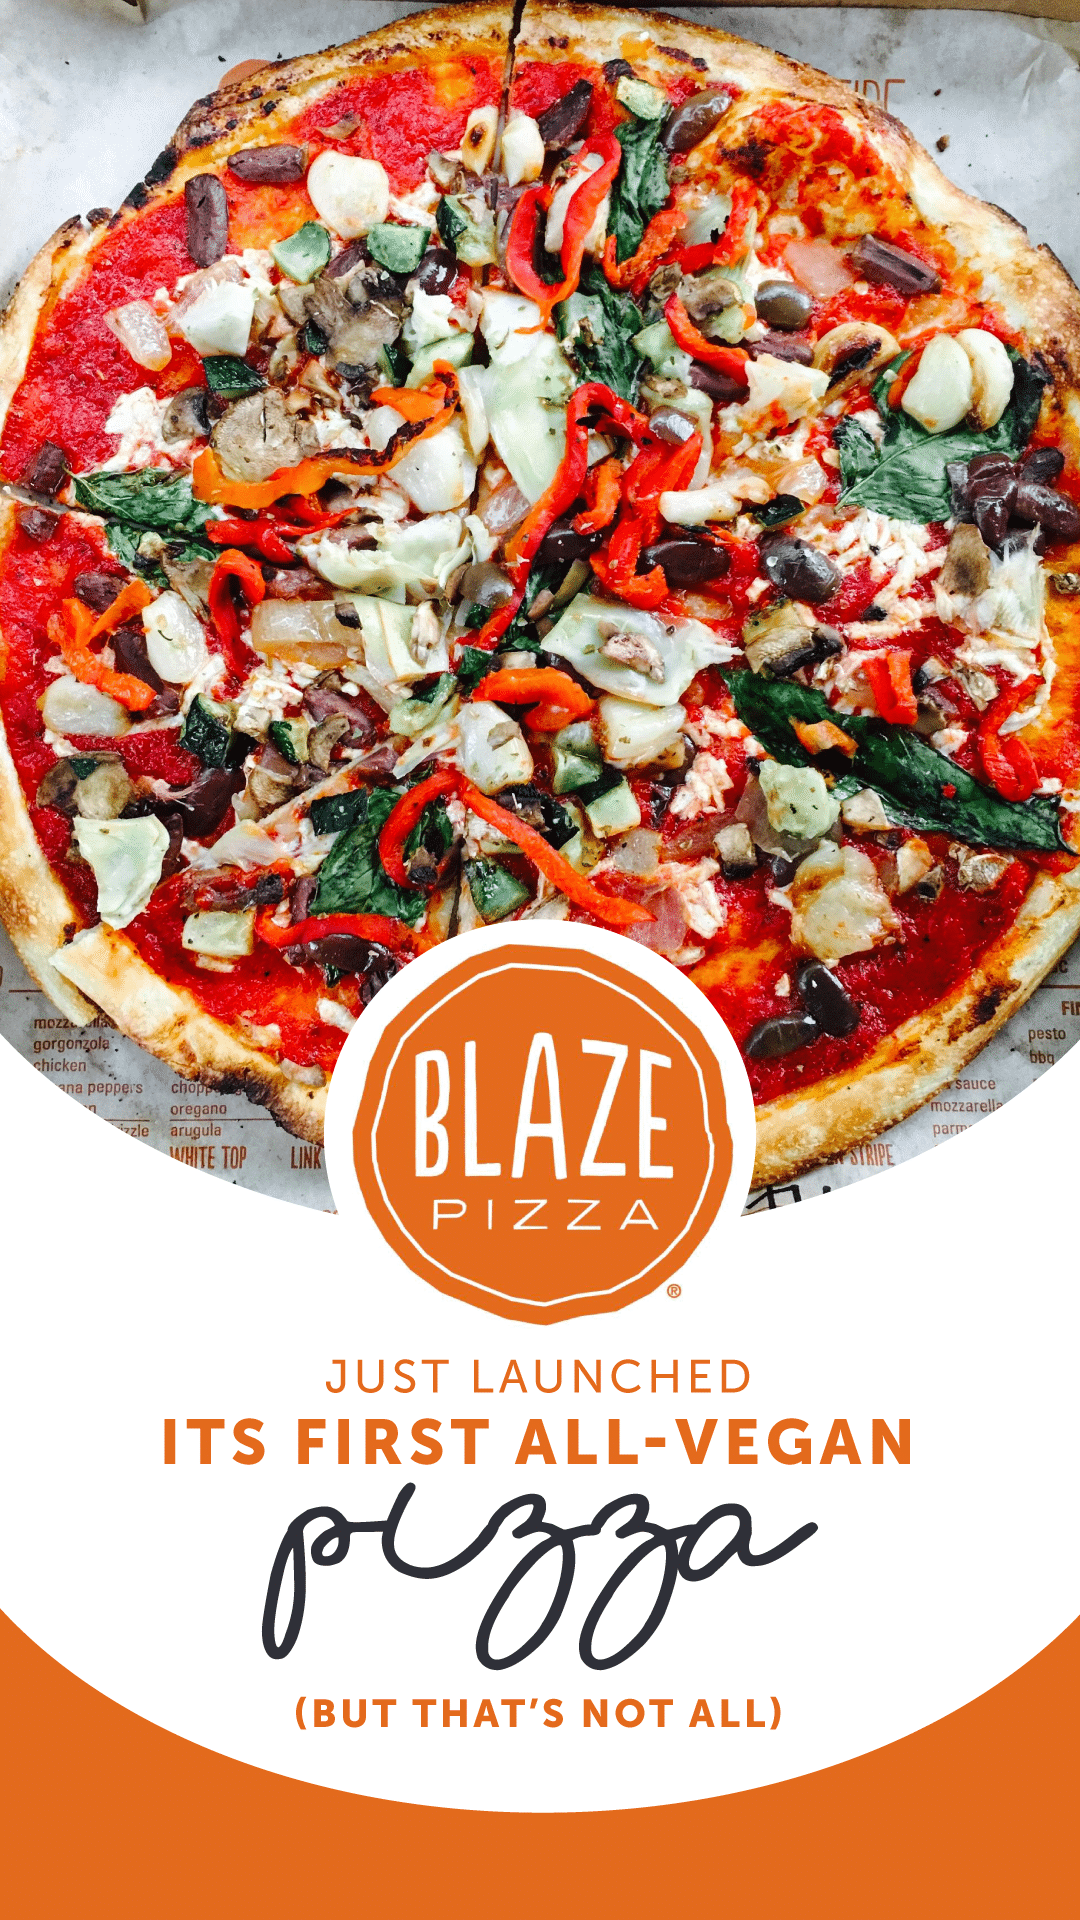 Blaze Pizza Just Launched Its First All-Vegan Pizza, but That’s Not All